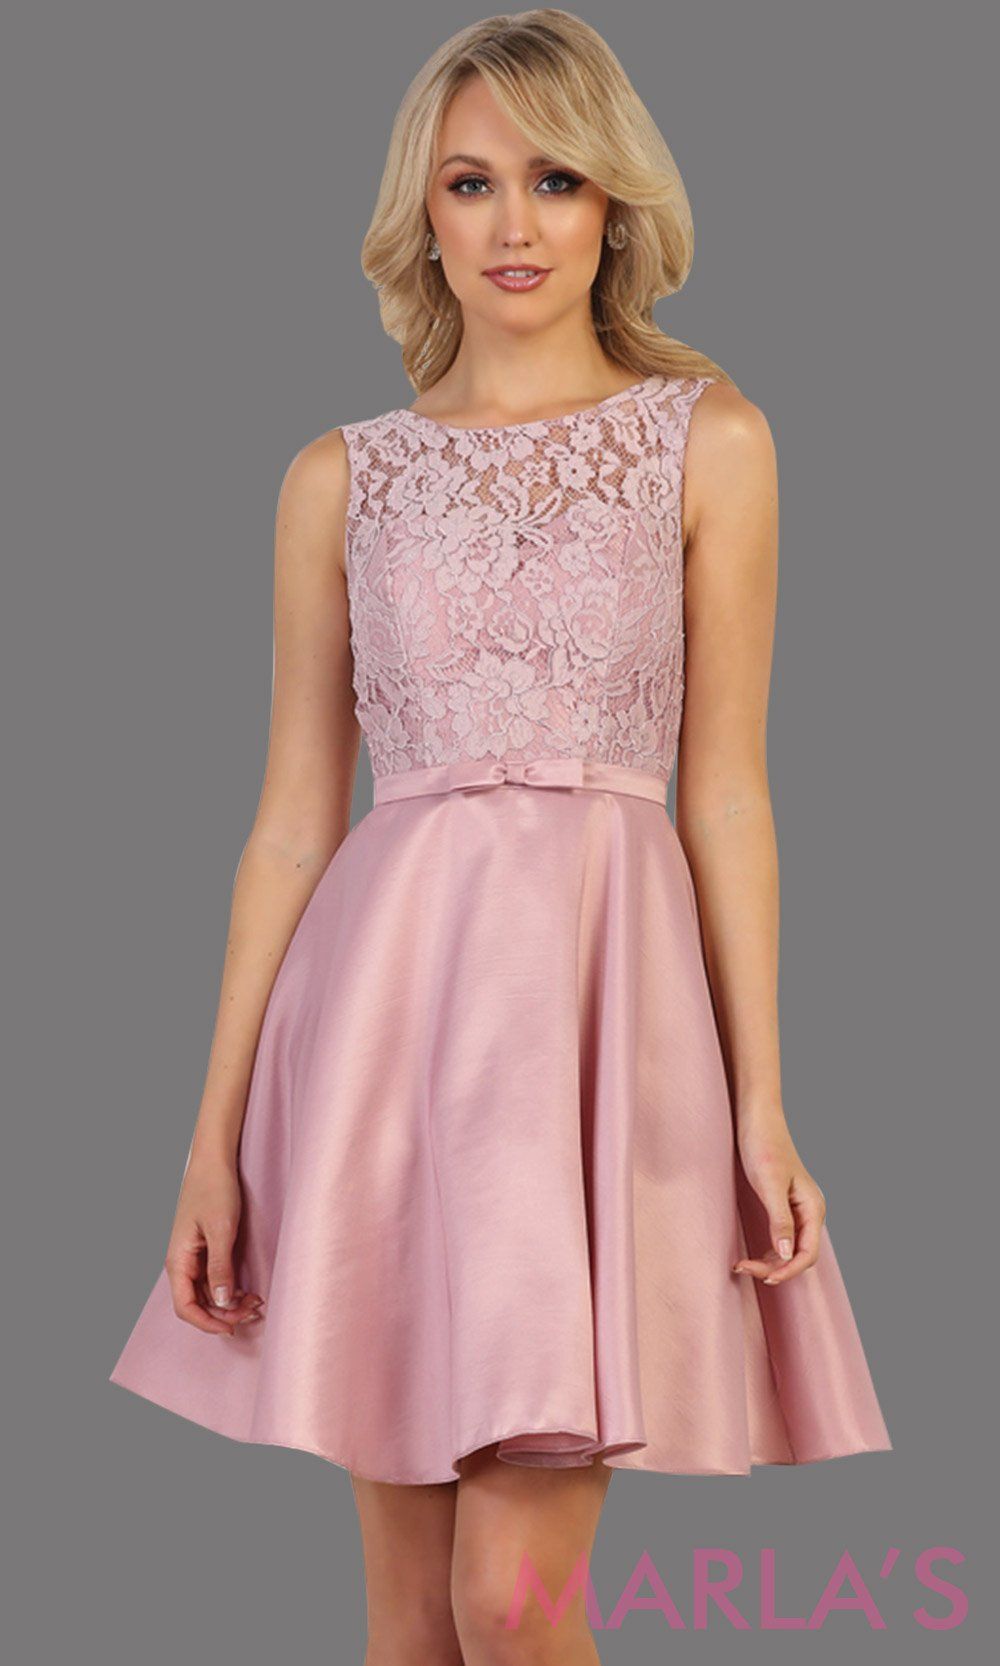 Short simple  semi formal mauve dress with lace bodice and satin skirt. Dusty rose dress is perfect for grade 8 grad, graduation, short prom, damas quinceanera, confirmation. Available in plus sizes.grade 8 grad dresses, graduation dresses